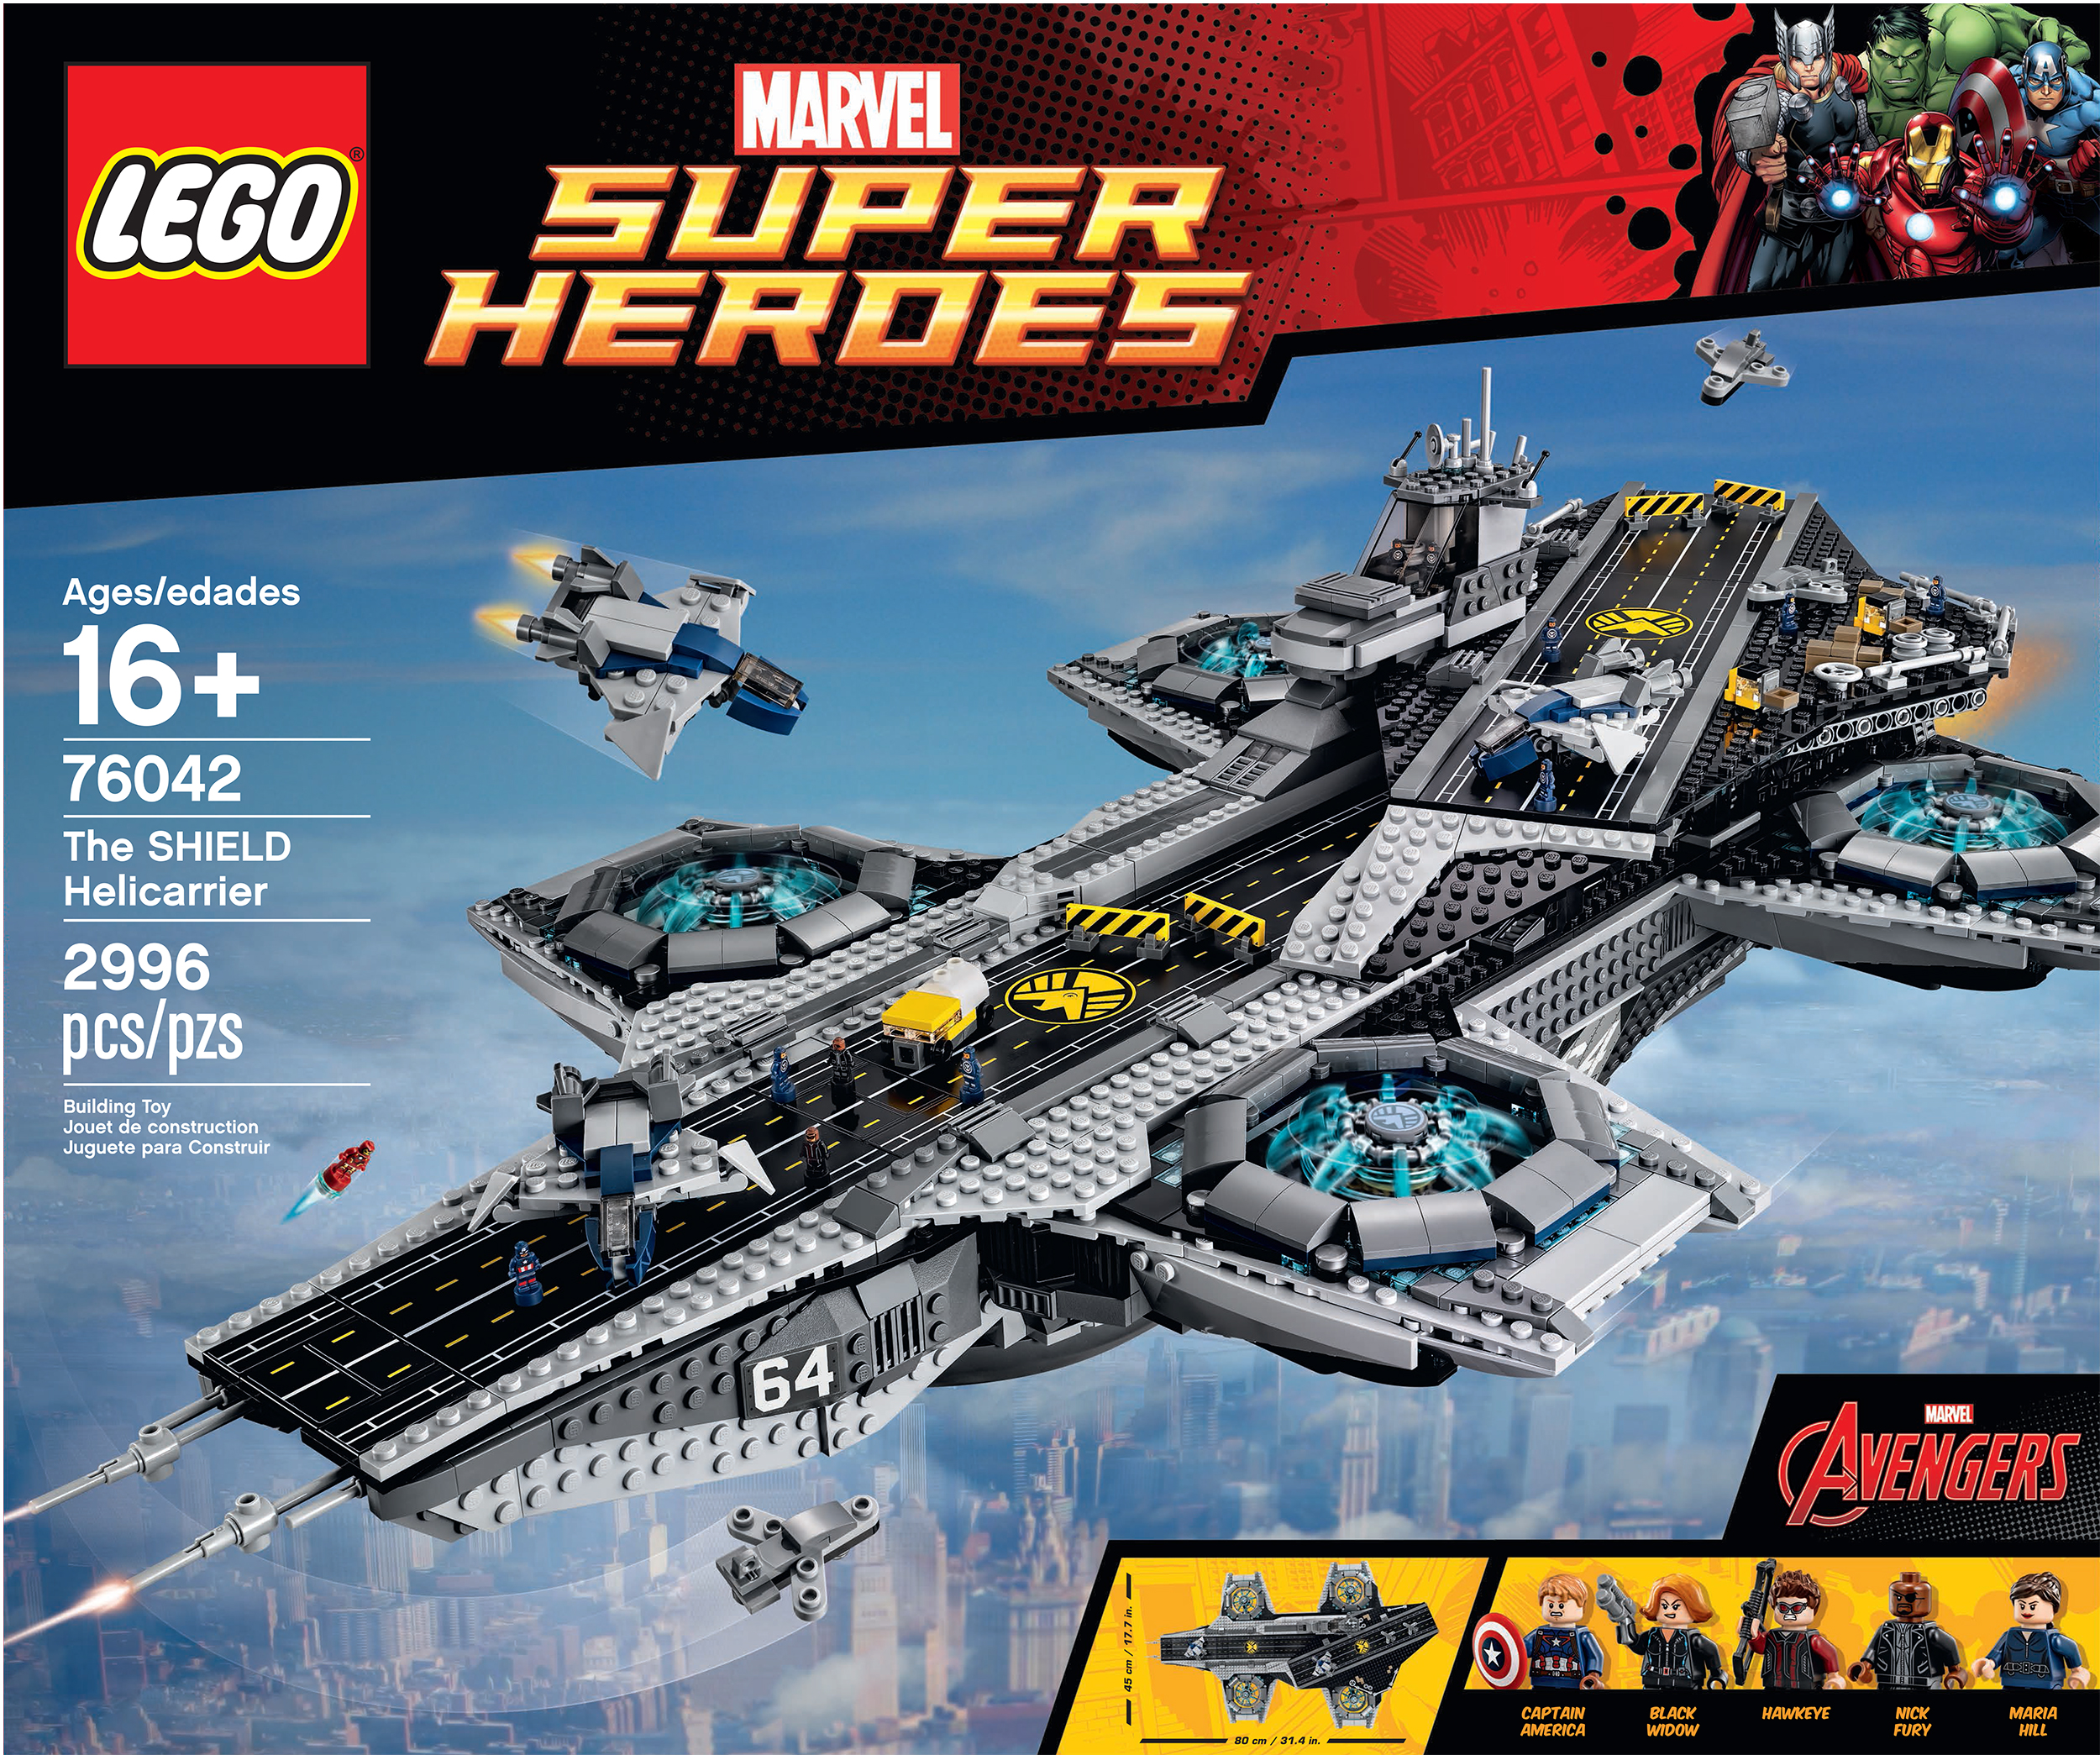 Amazon Discounts 76042 The SHIELD Helicarrier by $50 - FBTB